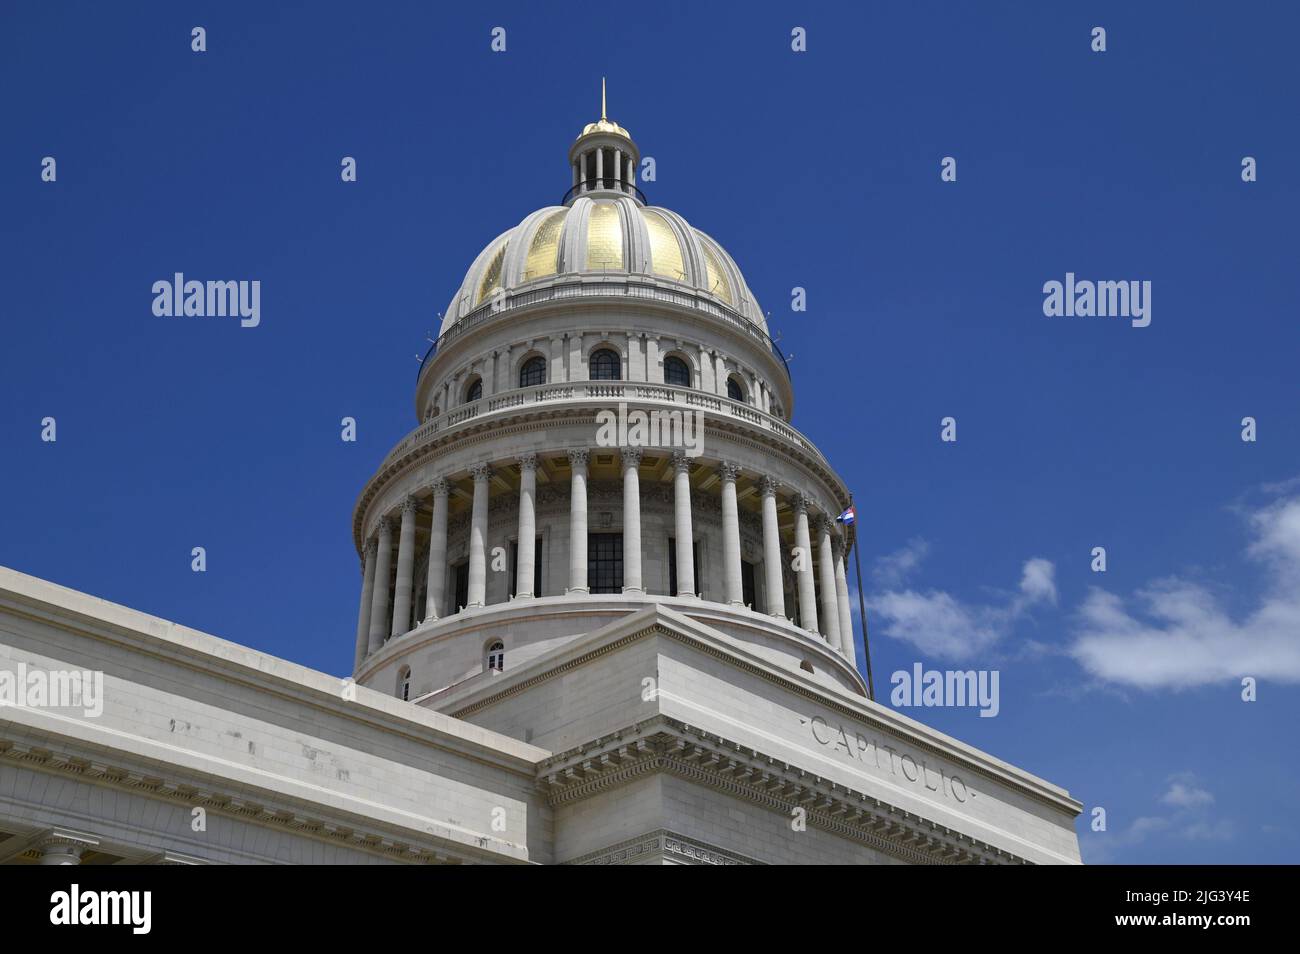 Landscape with panoramic cupola view of El Capitolio, the emblematic National Capitol building in the historic center of Havana, Cuba. Stock Photo